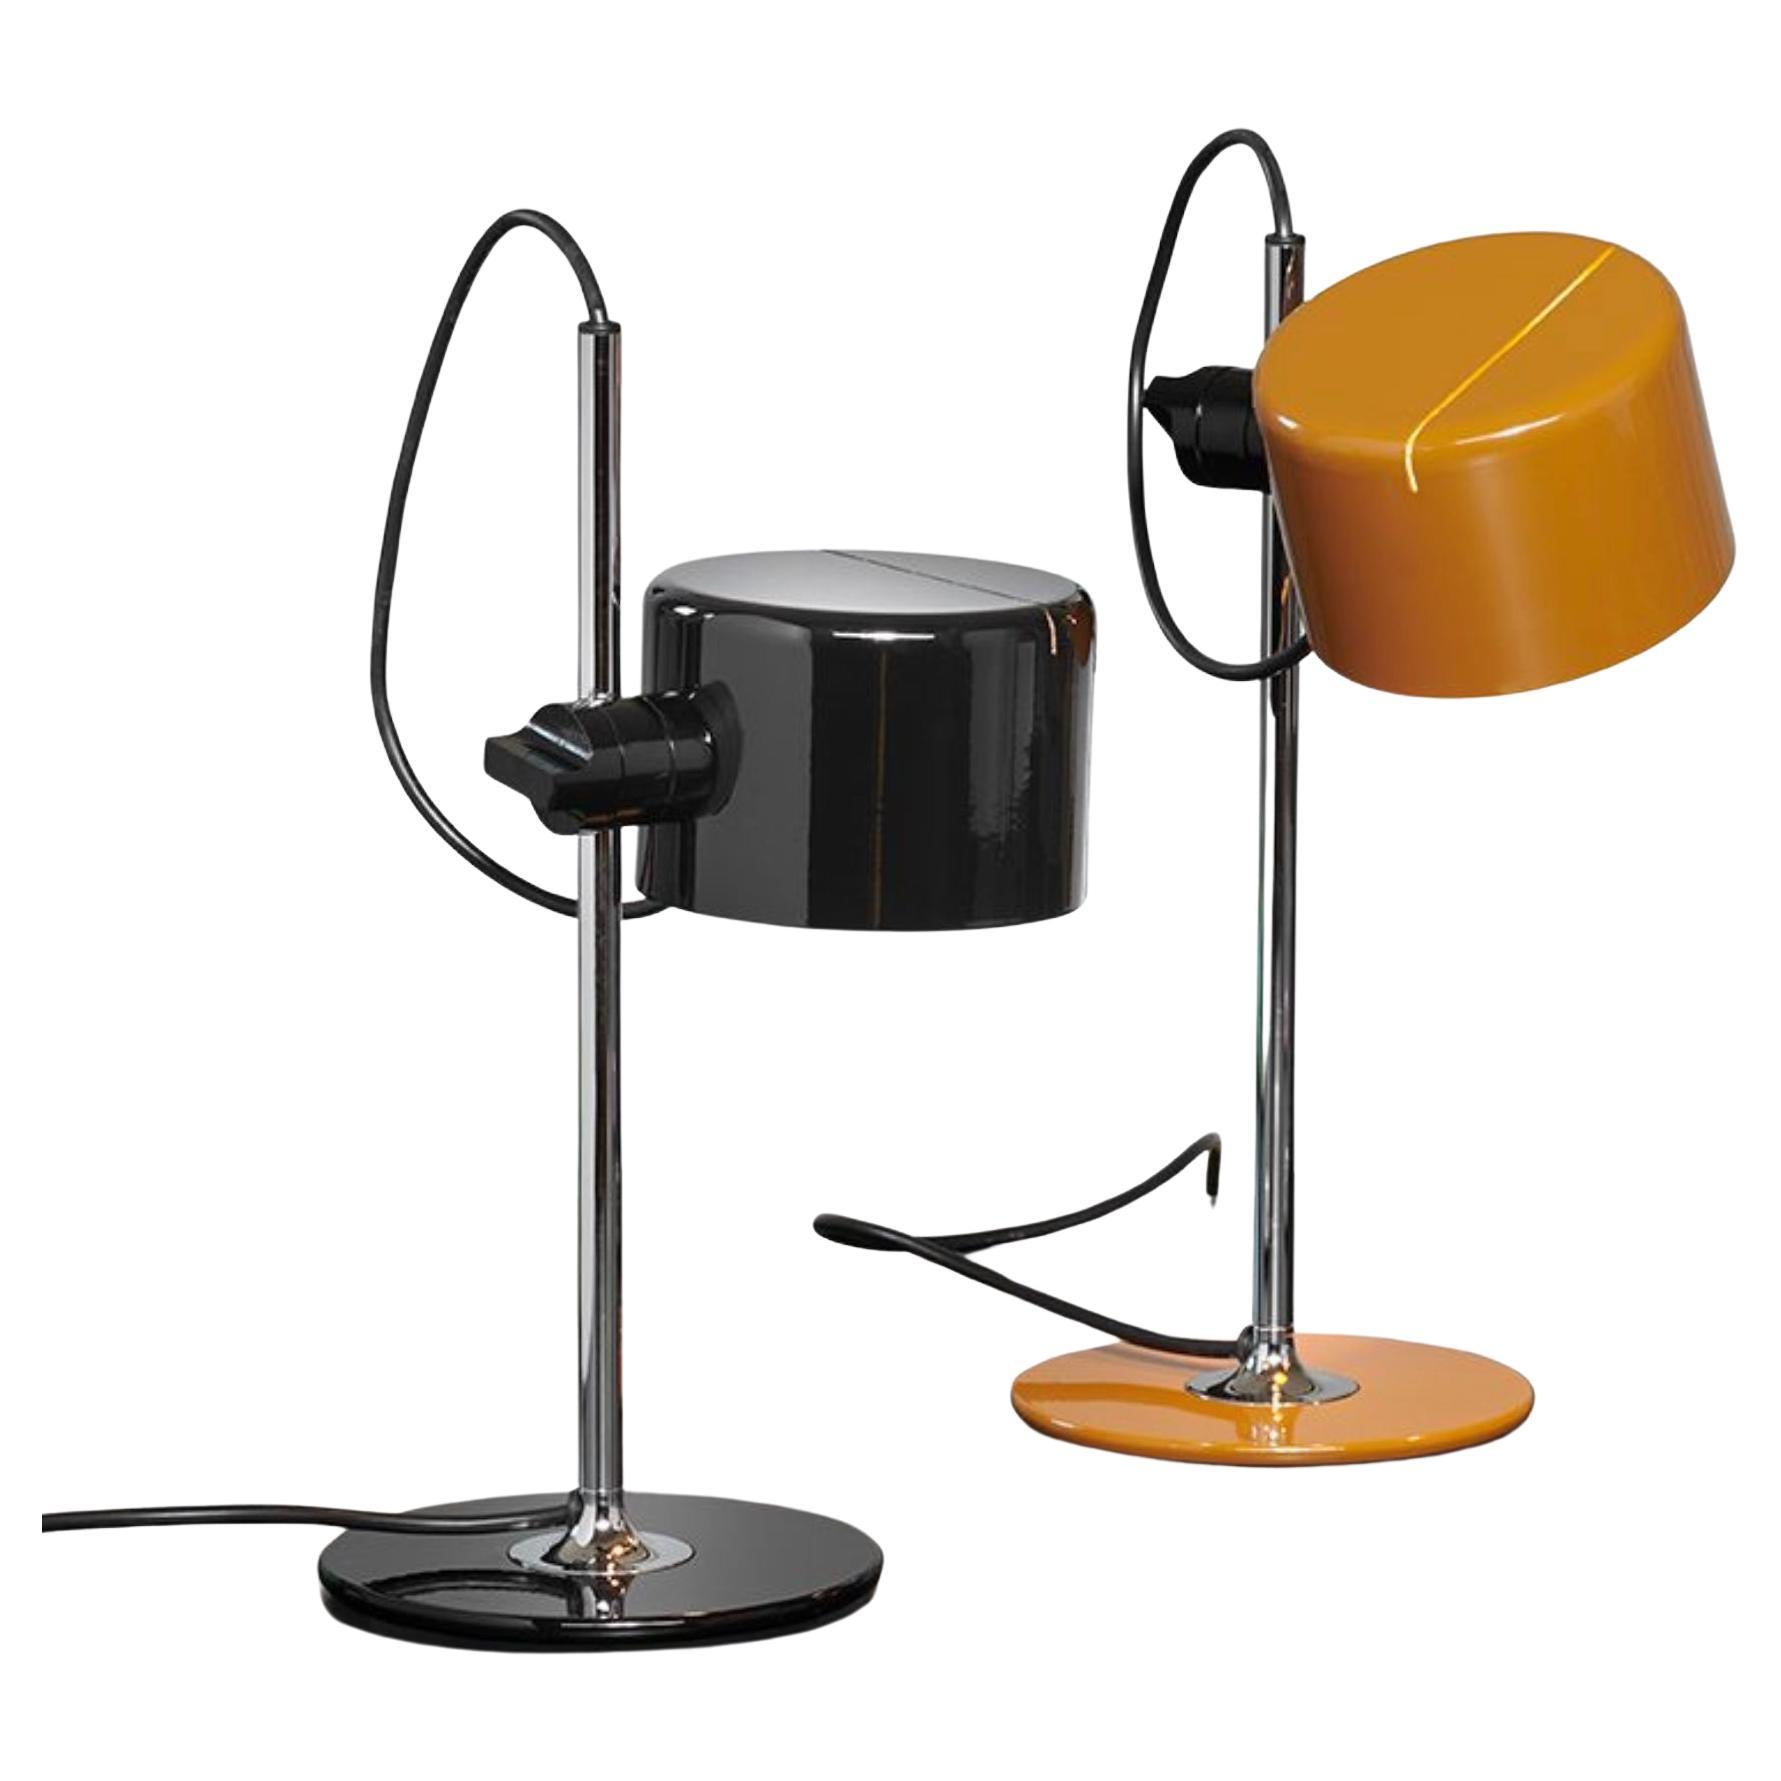 Set of Two Joe Colombo Mini Coupe Table Lamps by Oluce